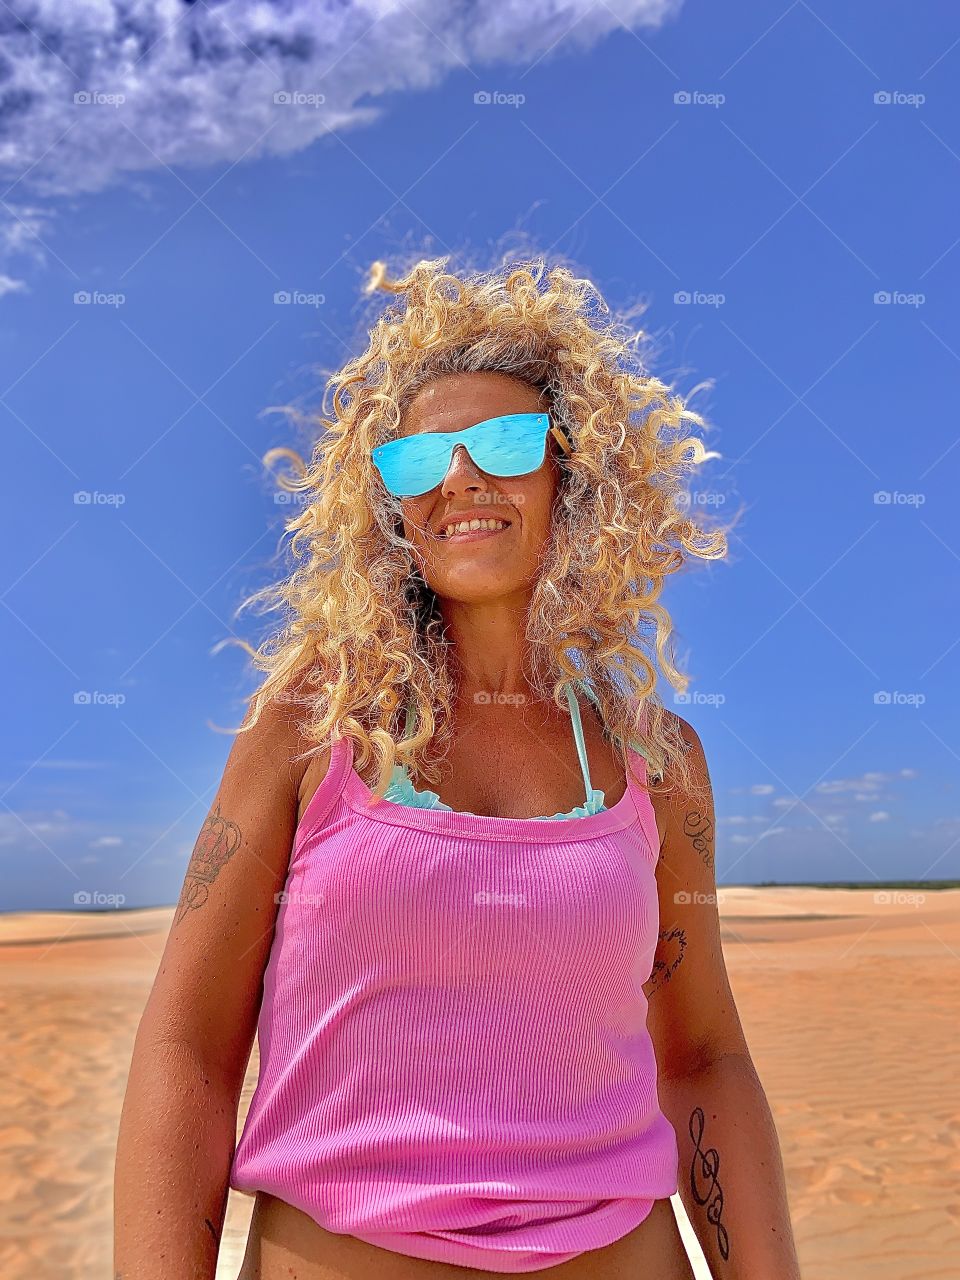 Blonde hair woman with pink clothes against desert and sky